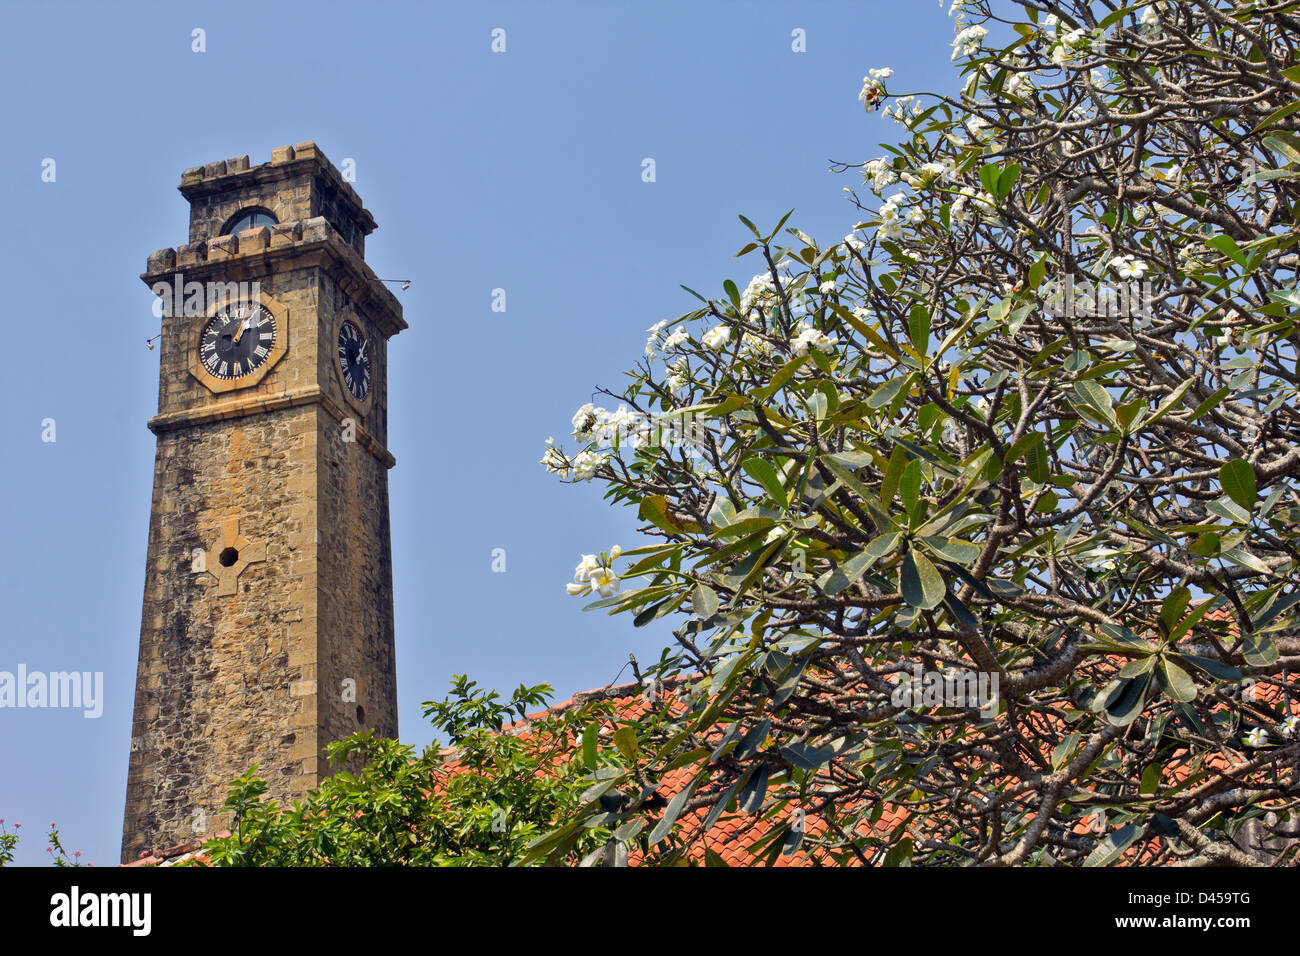 THE OLD CLOCK TOWER WITHIN  FORT GALLE SURROUNDED BY FRANGIPANI FLOWERS Stock Photo